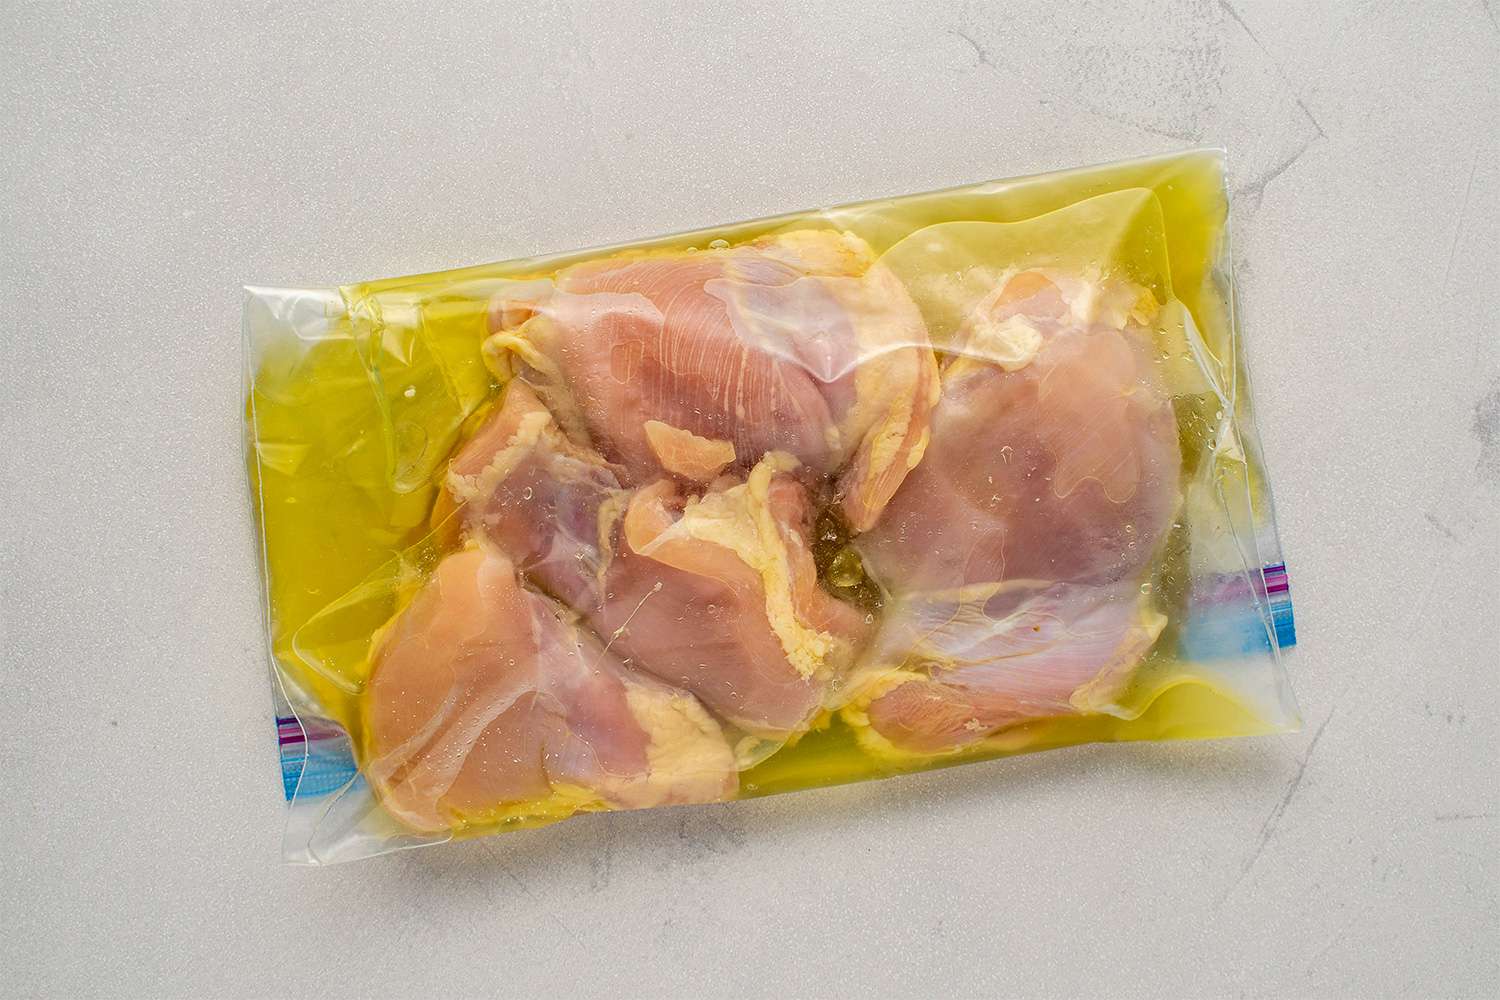 Chicken thighs and pickle juice in a zip-top bag